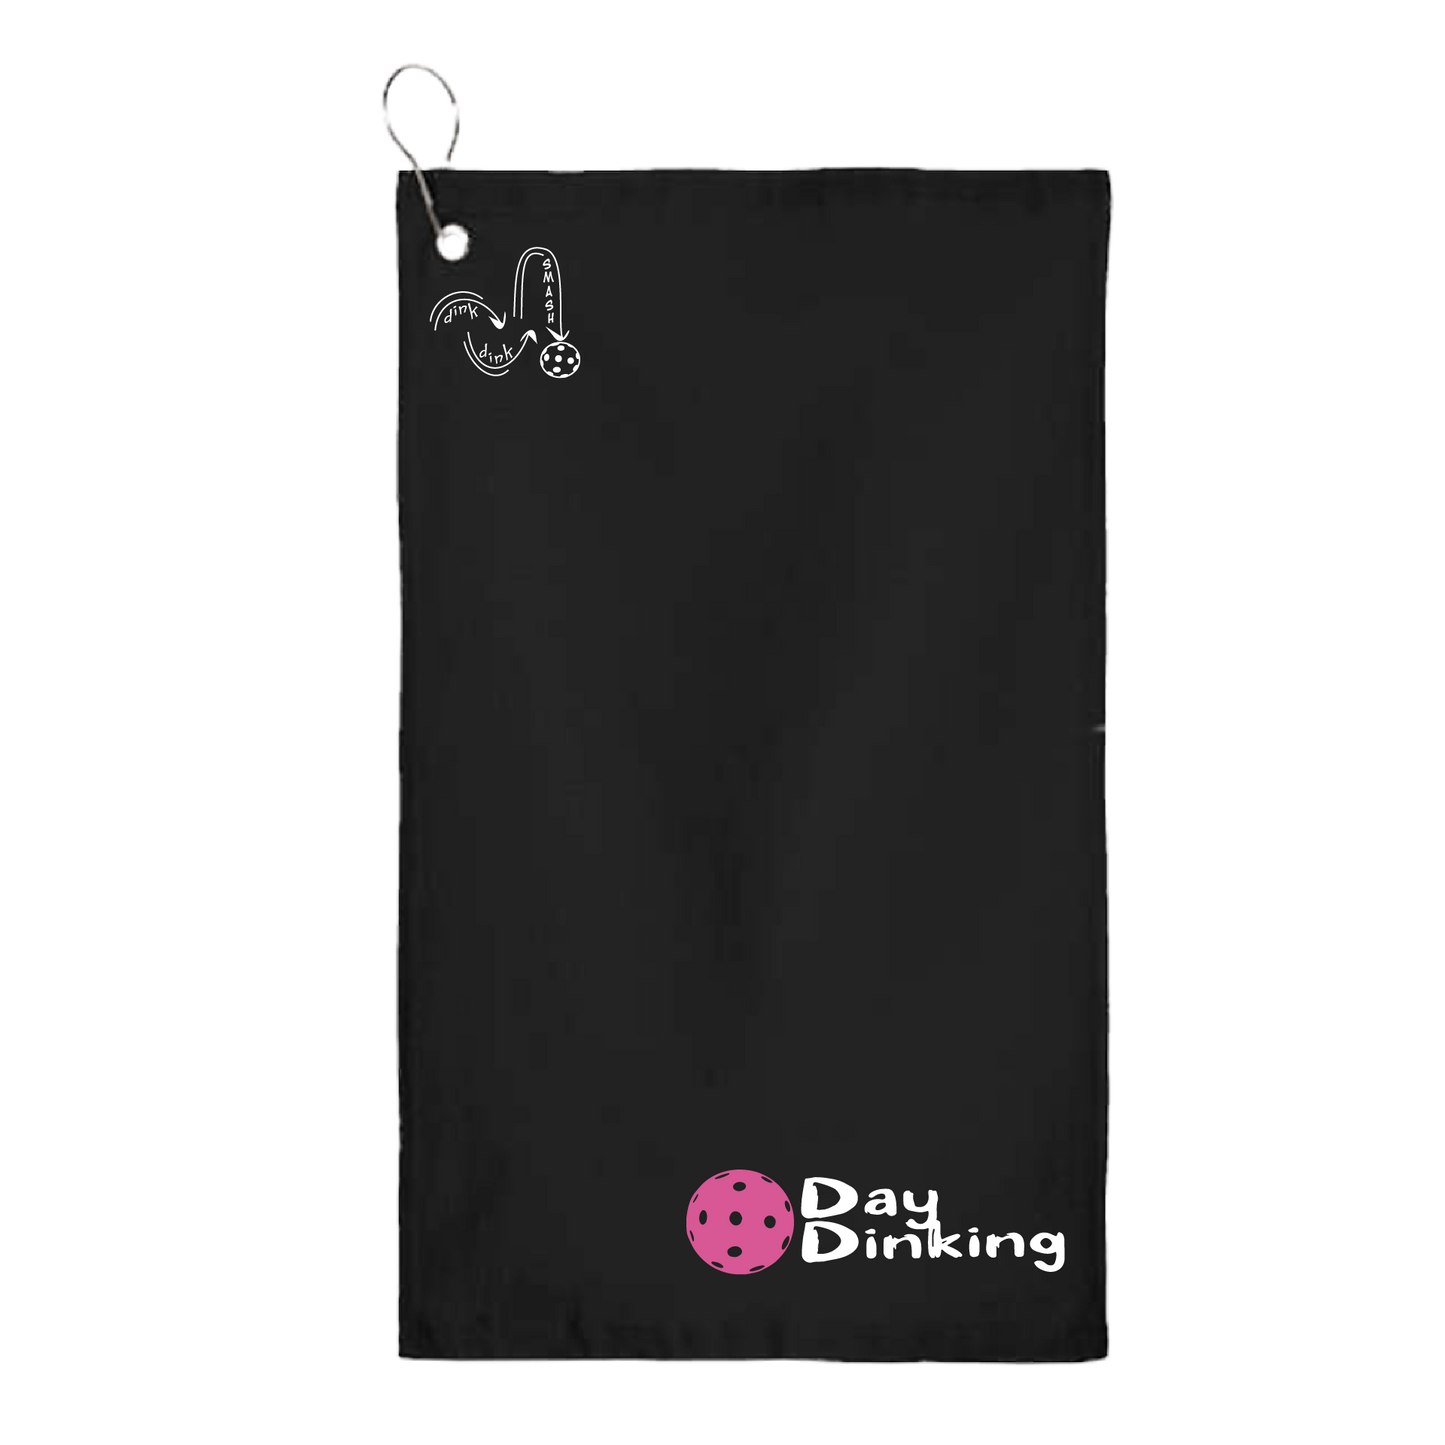 This Day Dinking pickleball towel is crafted with cotton terry velour for optimal performance. It features grommets, hooks, and hemmed edges for added durability. It's perfect for completing your pickleball gear, and an ideal gift for friends and tournaments. The towel is designed to be both absorbent and lightweight, so you can remain dry and comfortable while you play. Plus, its long-lasting power will keep it looking great and working well for many games to come.